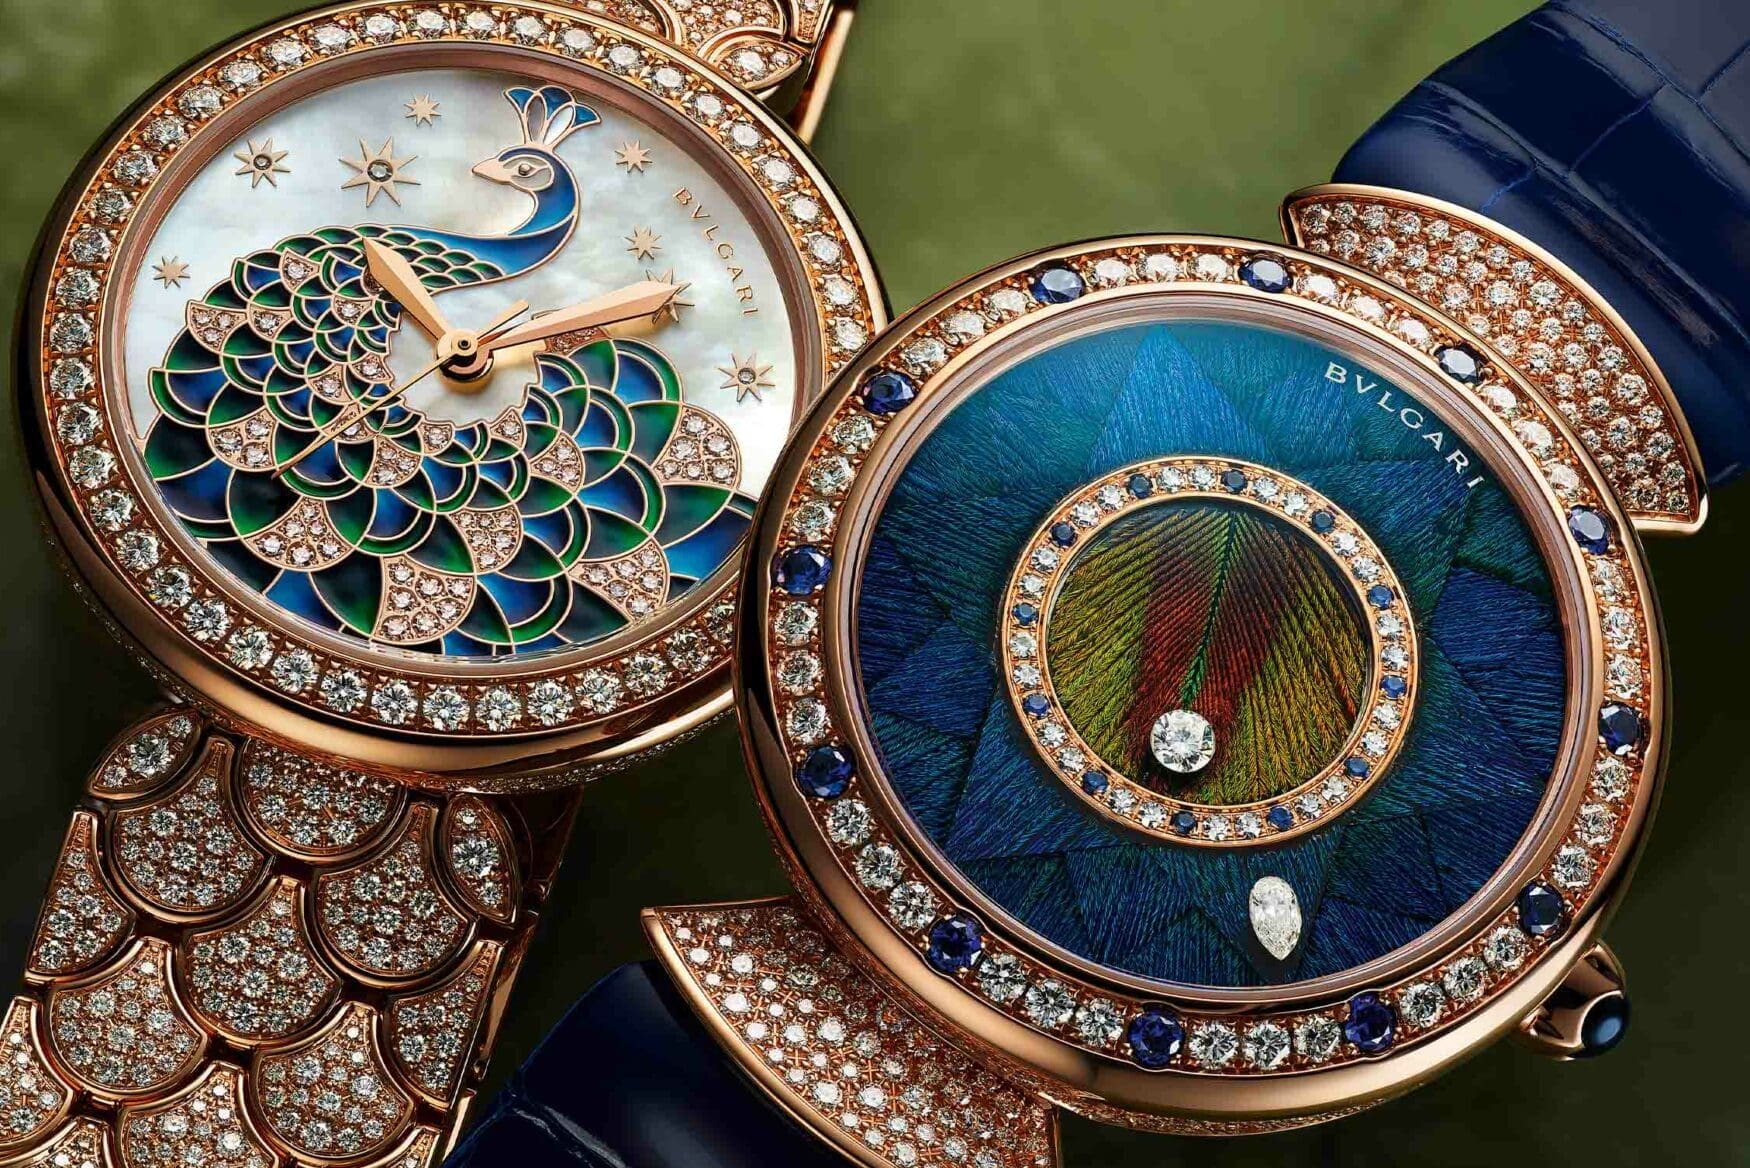 Tickle your fancy with the feathers of Bulgari’s Divas’ Dream Peacock